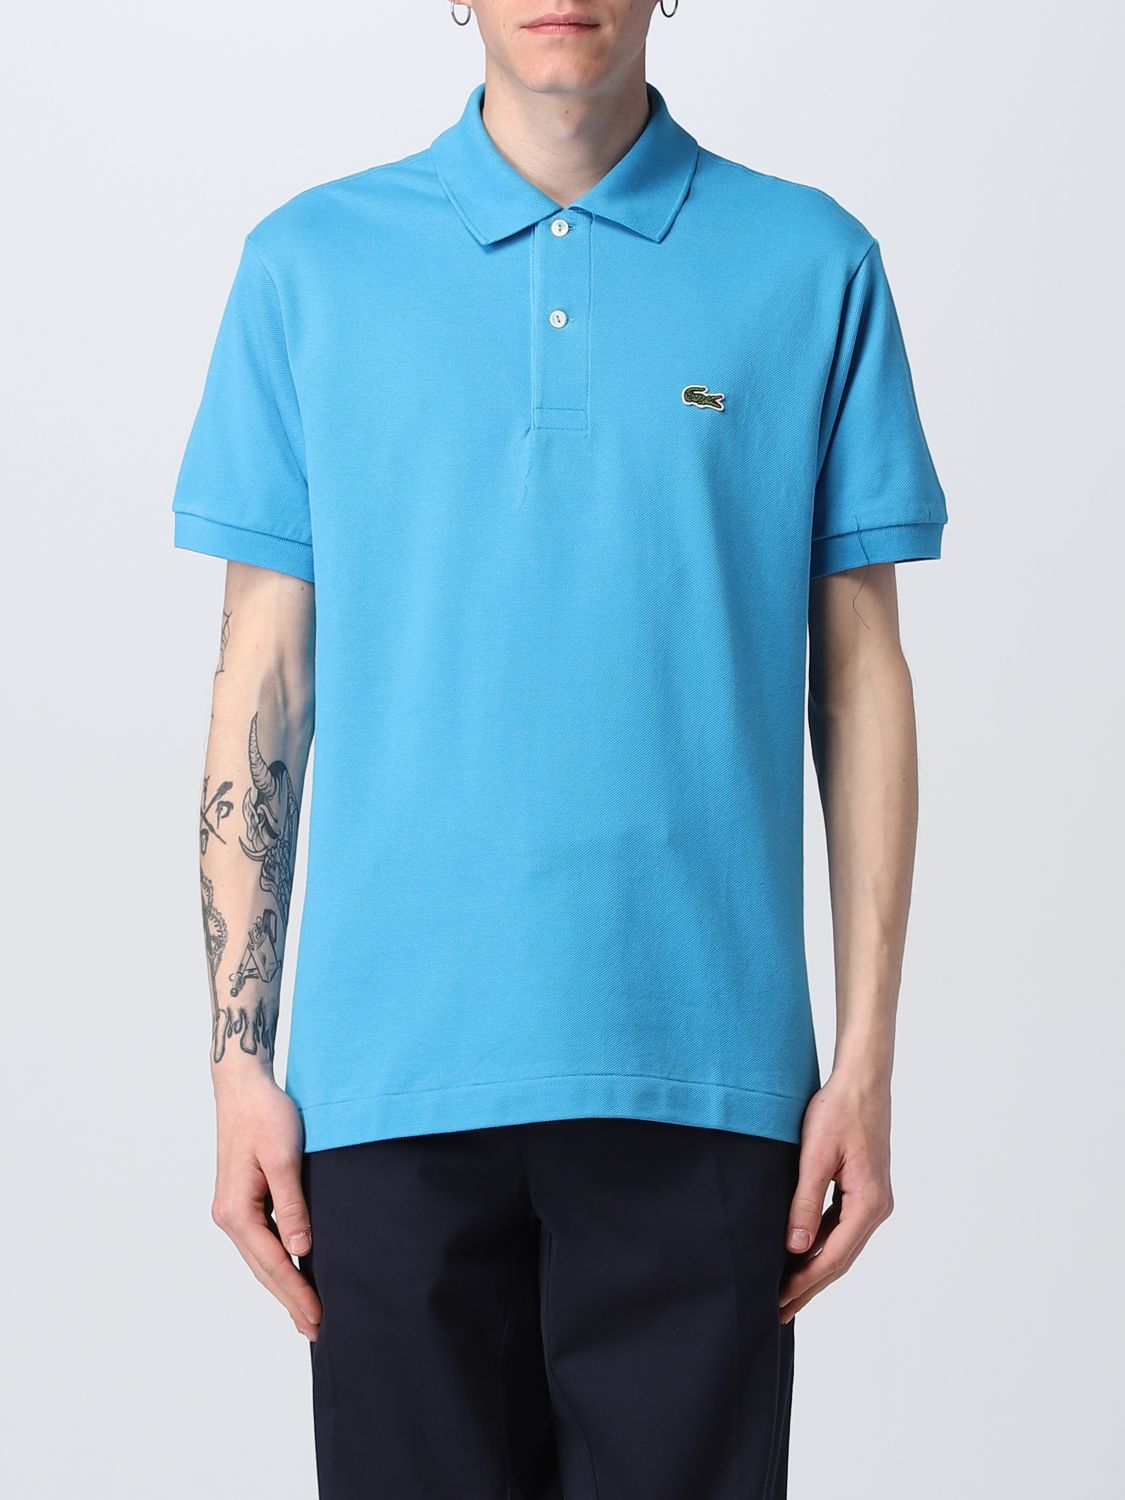 Lacoste Short Sleeve Pique Polo Shirt - Classic Fit In Appalachian Green |  ModeSens